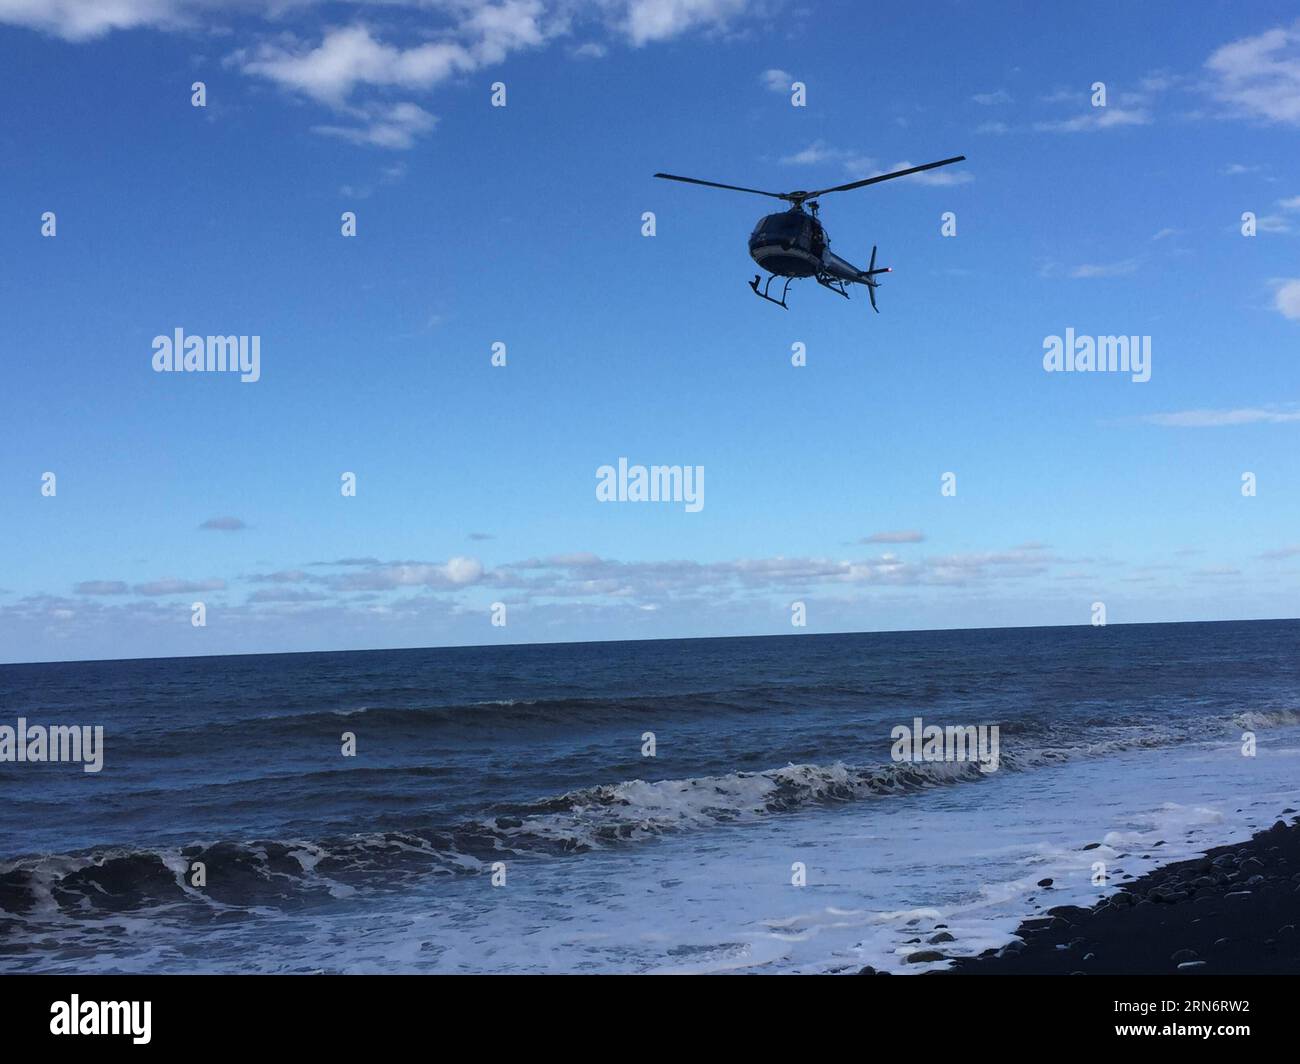 (150806) -- THE REUNION ISLAND, Aug. 6, 2015 -- A helicopter searchs over the sea on Reunion Island, on Jul.30, 2015. Verification had confirmed that the debris discovered on Reunion Island belongs to missing Malaysian Airlines flight MH370, Malaysian Prime Minister Najib Razak announced early Thursday. ) (jmmn) THE REUNION ISLAND-MH 370 FLIGHT-DEBIRS RomainxLatournerie PUBLICATIONxNOTxINxCHN   150806 The Reunion Iceland Aug 6 2015 a Helicopter search Over The Sea ON Reunion Iceland ON JUL 30 2015 Verification had confirmed Thatcher The debris discovered ON Reunion Iceland belongs to Missing M Stock Photo